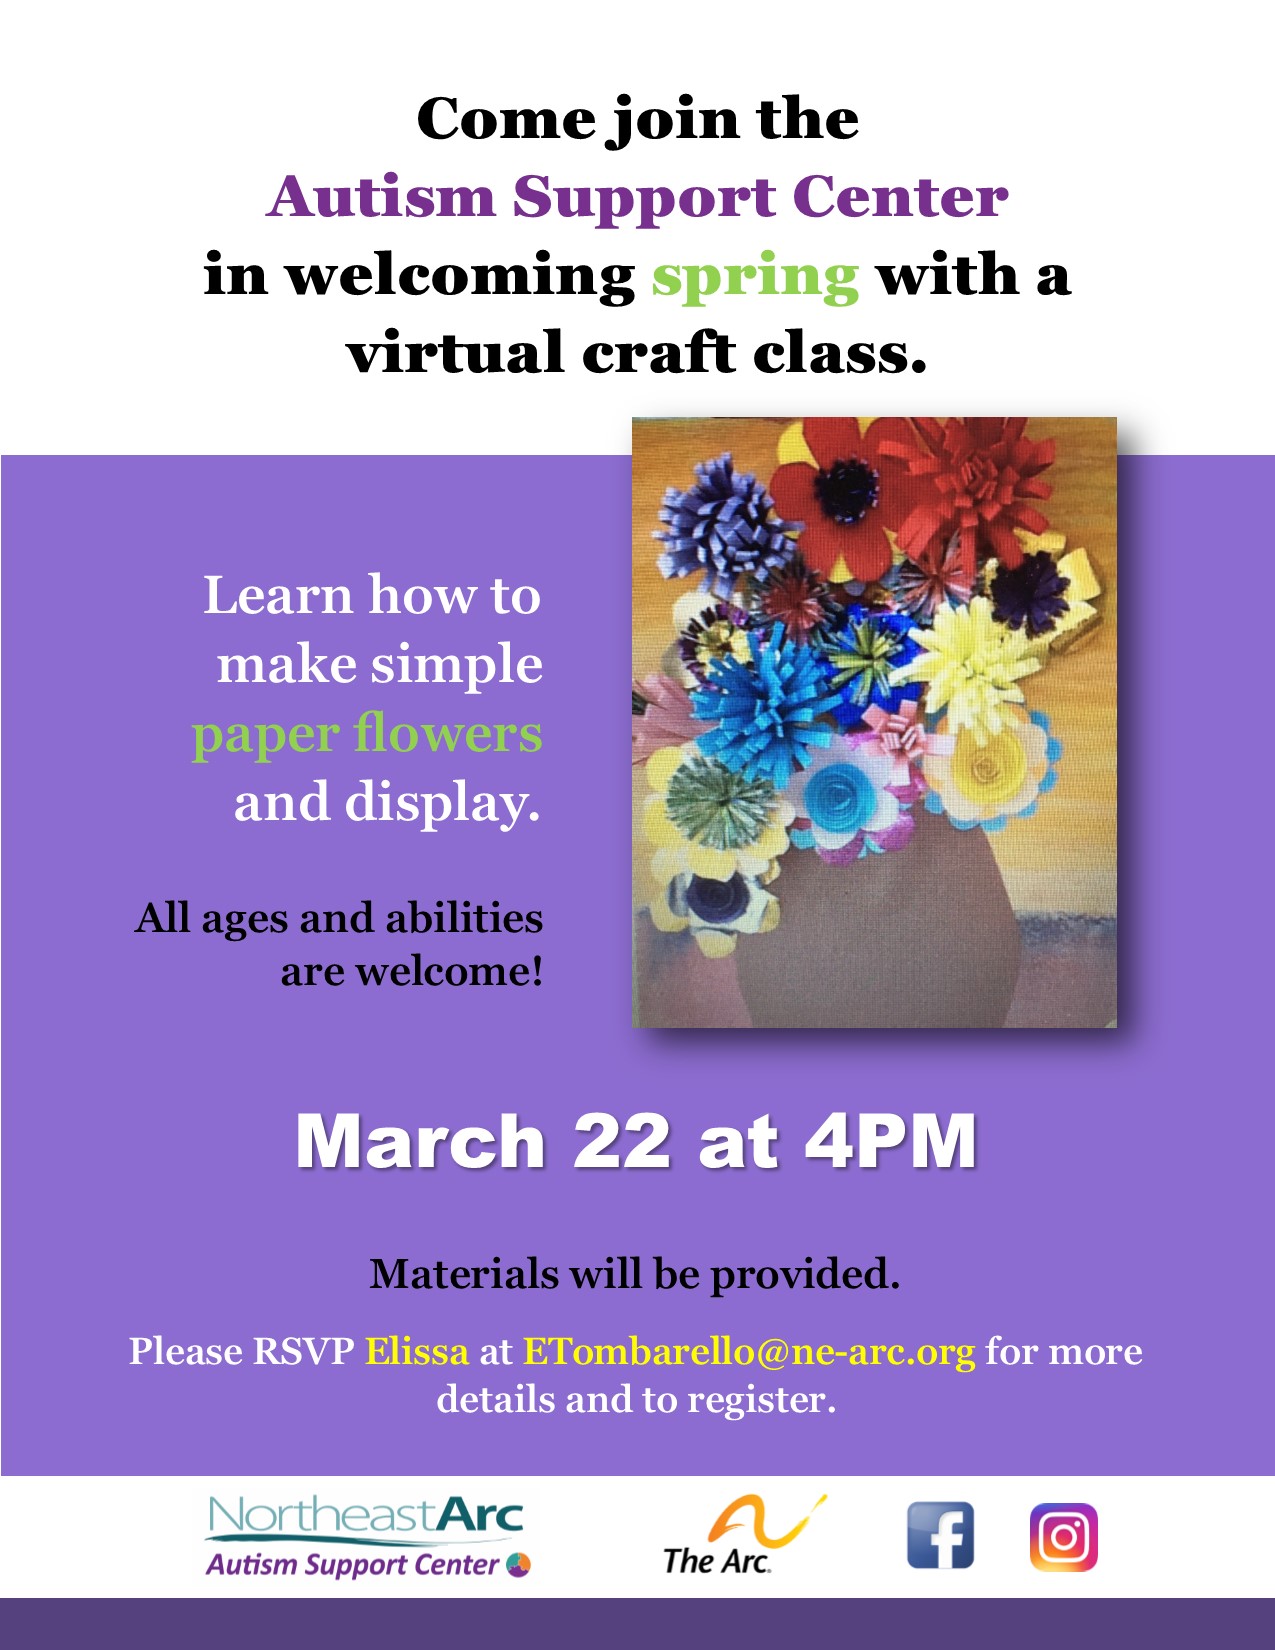 Autism Support Center Virtual Spring Craft Class Activity - Paper Flowers! March 22 at 4PM. All ages and abilities welcome. RSVP Elissa at ETombarello@ne-arc.org for more details and to register.